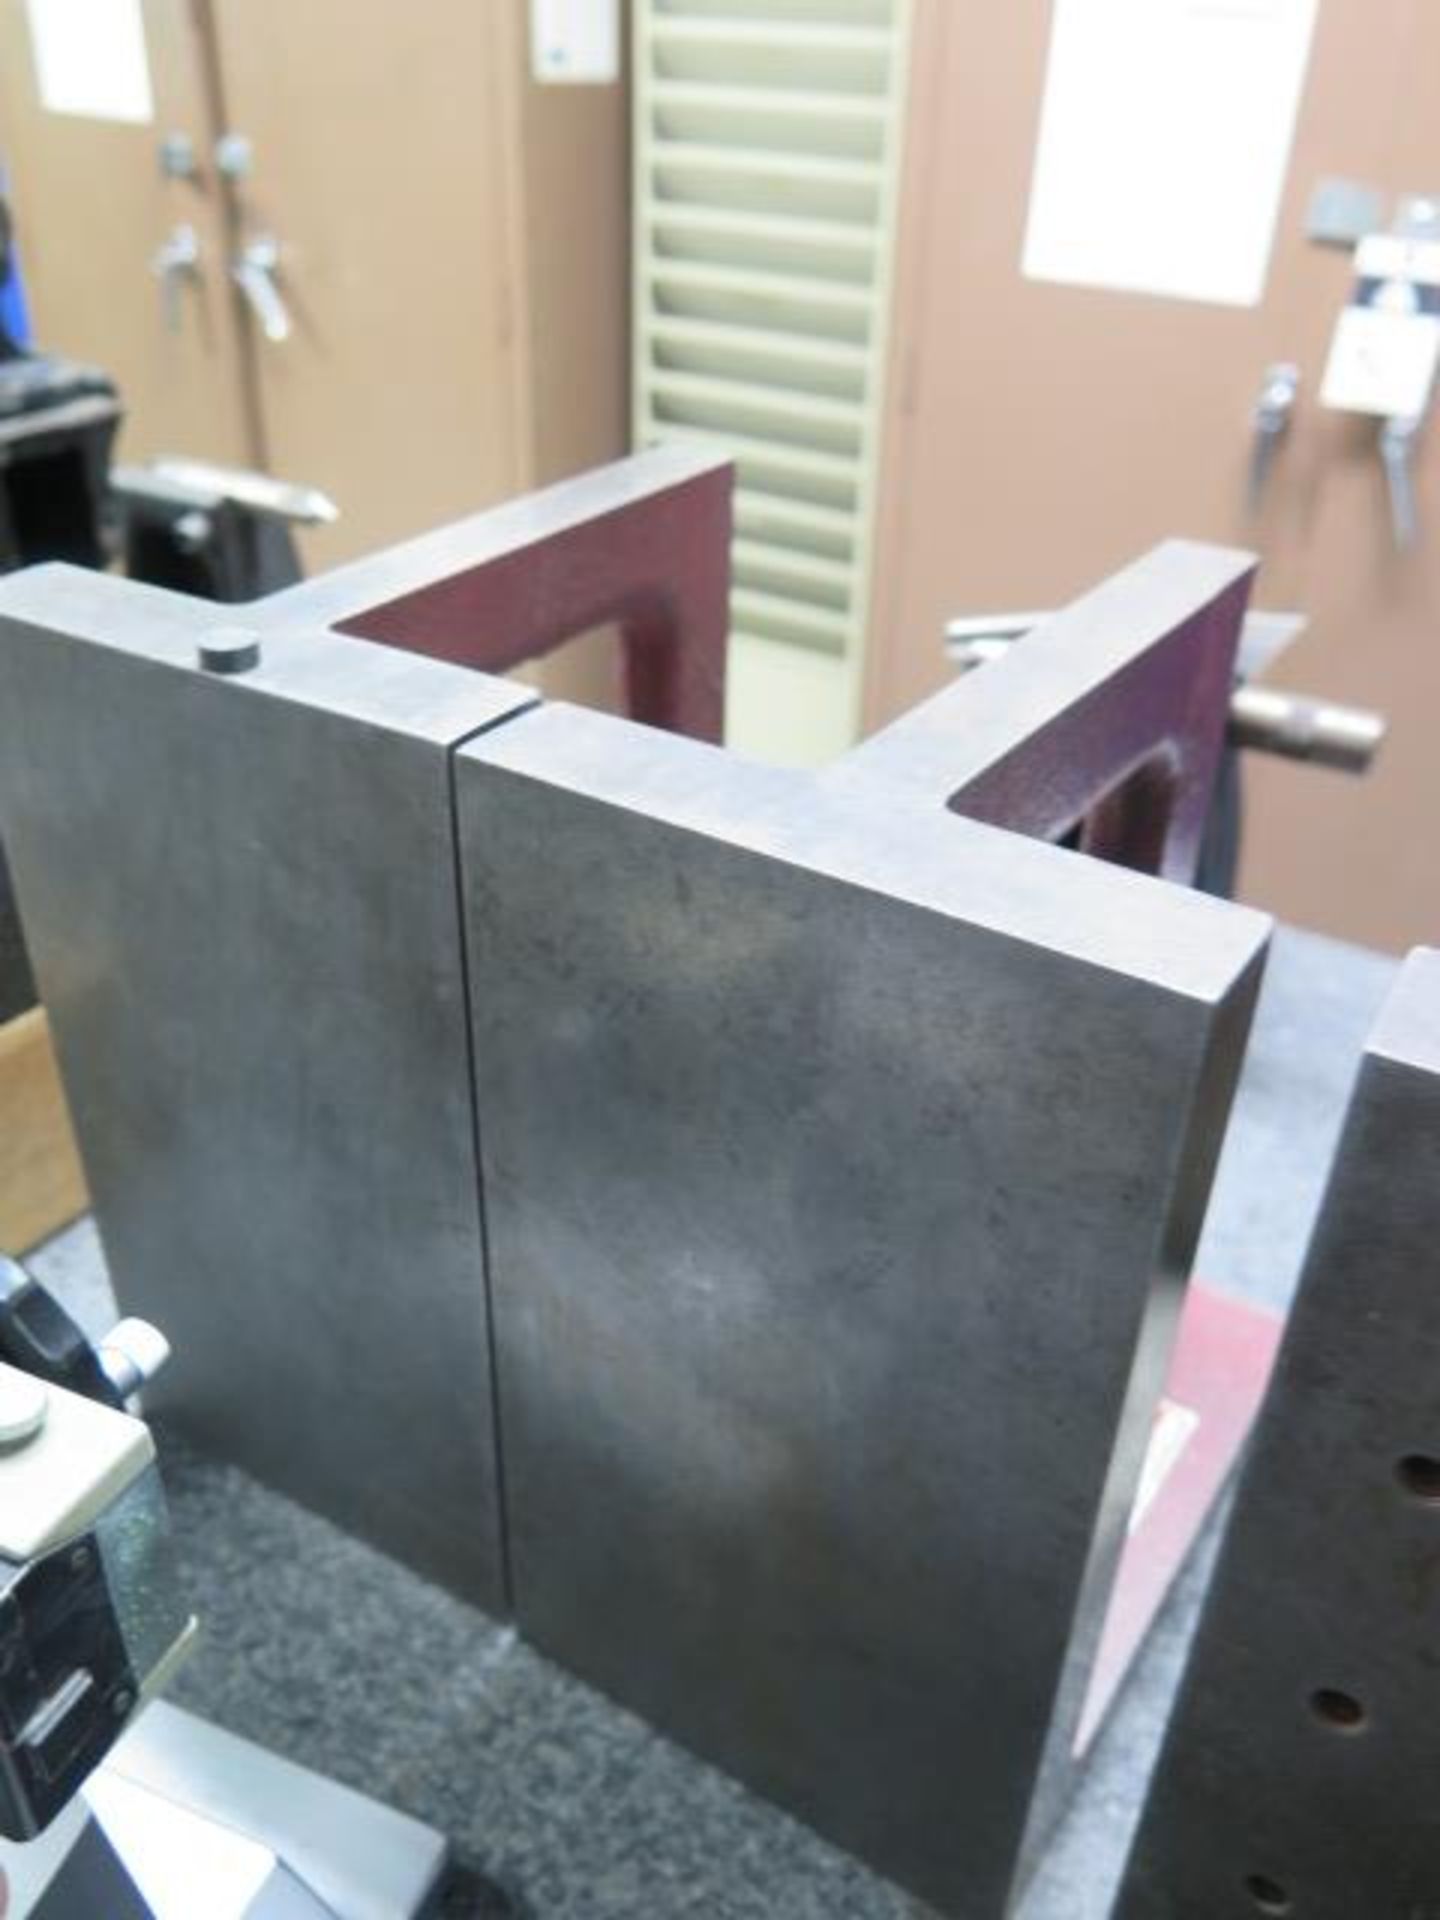 Suburban 5 ½” x 10” x 8” Angle Masters (2) and (2) Angle Plates (SOLD AS-IS - NO WARRANTY) - Image 2 of 7